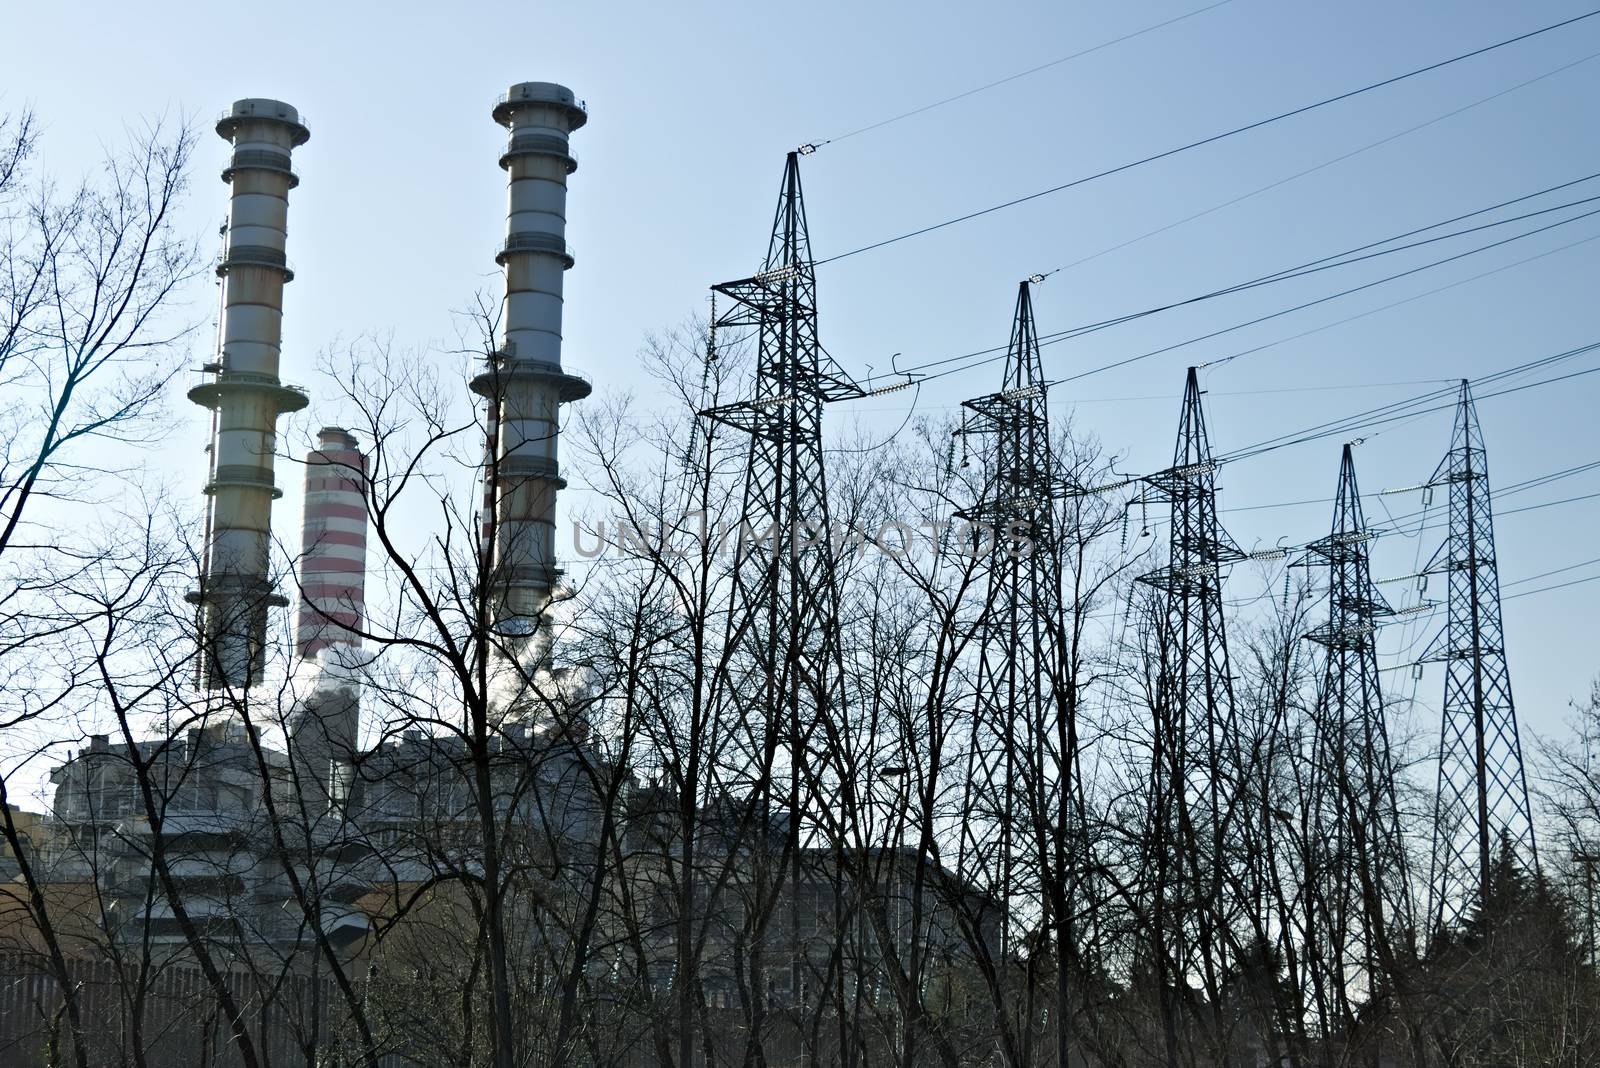 The Turbigo power plant, 40 km from Milan, owned by Iren is located along the Naviglio Grande. The video shows steam puffs coming out of the central, behind the tall chimneys.  The shot goes from the chimneys and pylons to the view of the dry river bed of the Naviglio that flows nearby.